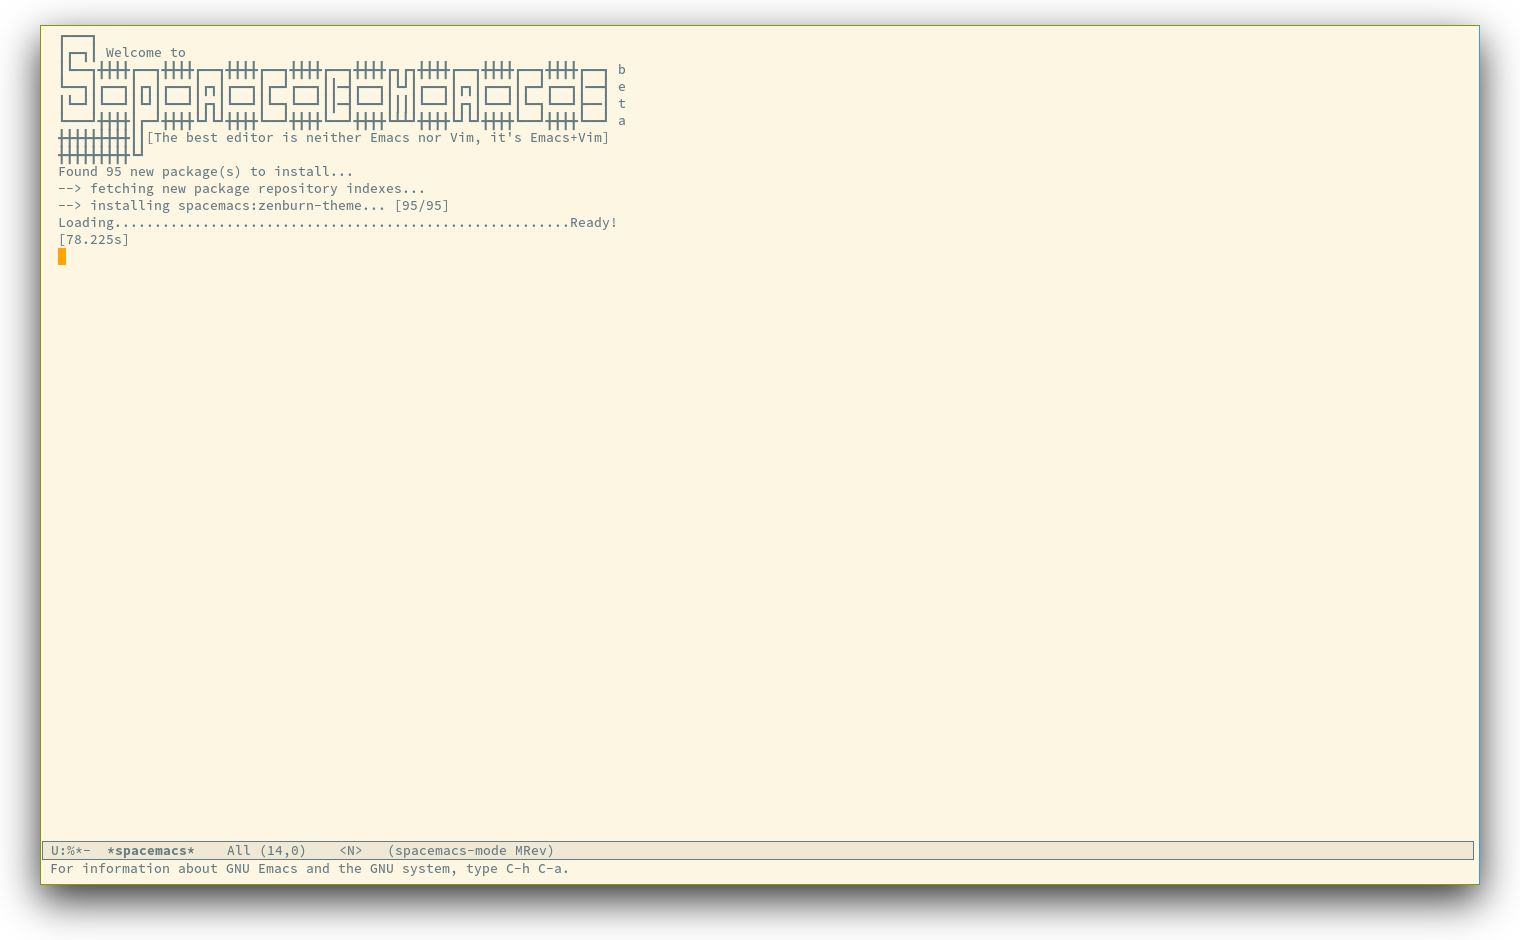 /TakeV/spacemacs/media/commit/d1c8e4b9f79acbc010a4c958bb588122024f4445/doc/img/spacemacs-startup.png